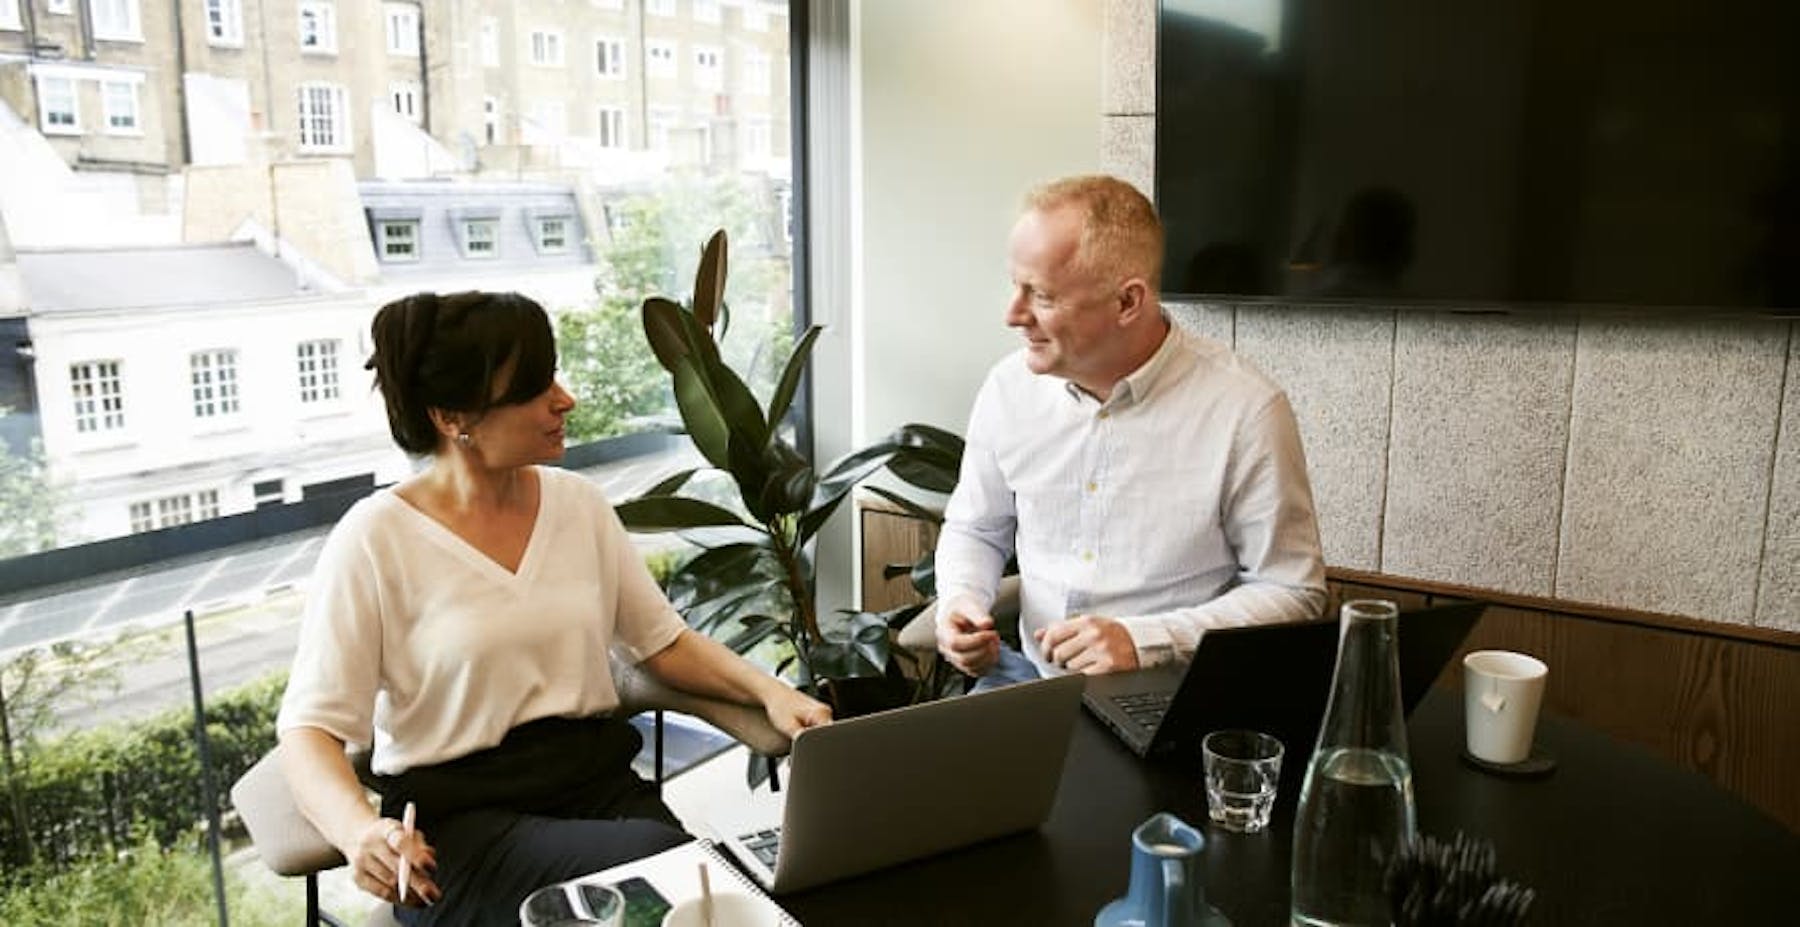 two colleagues sitting discussing in an office